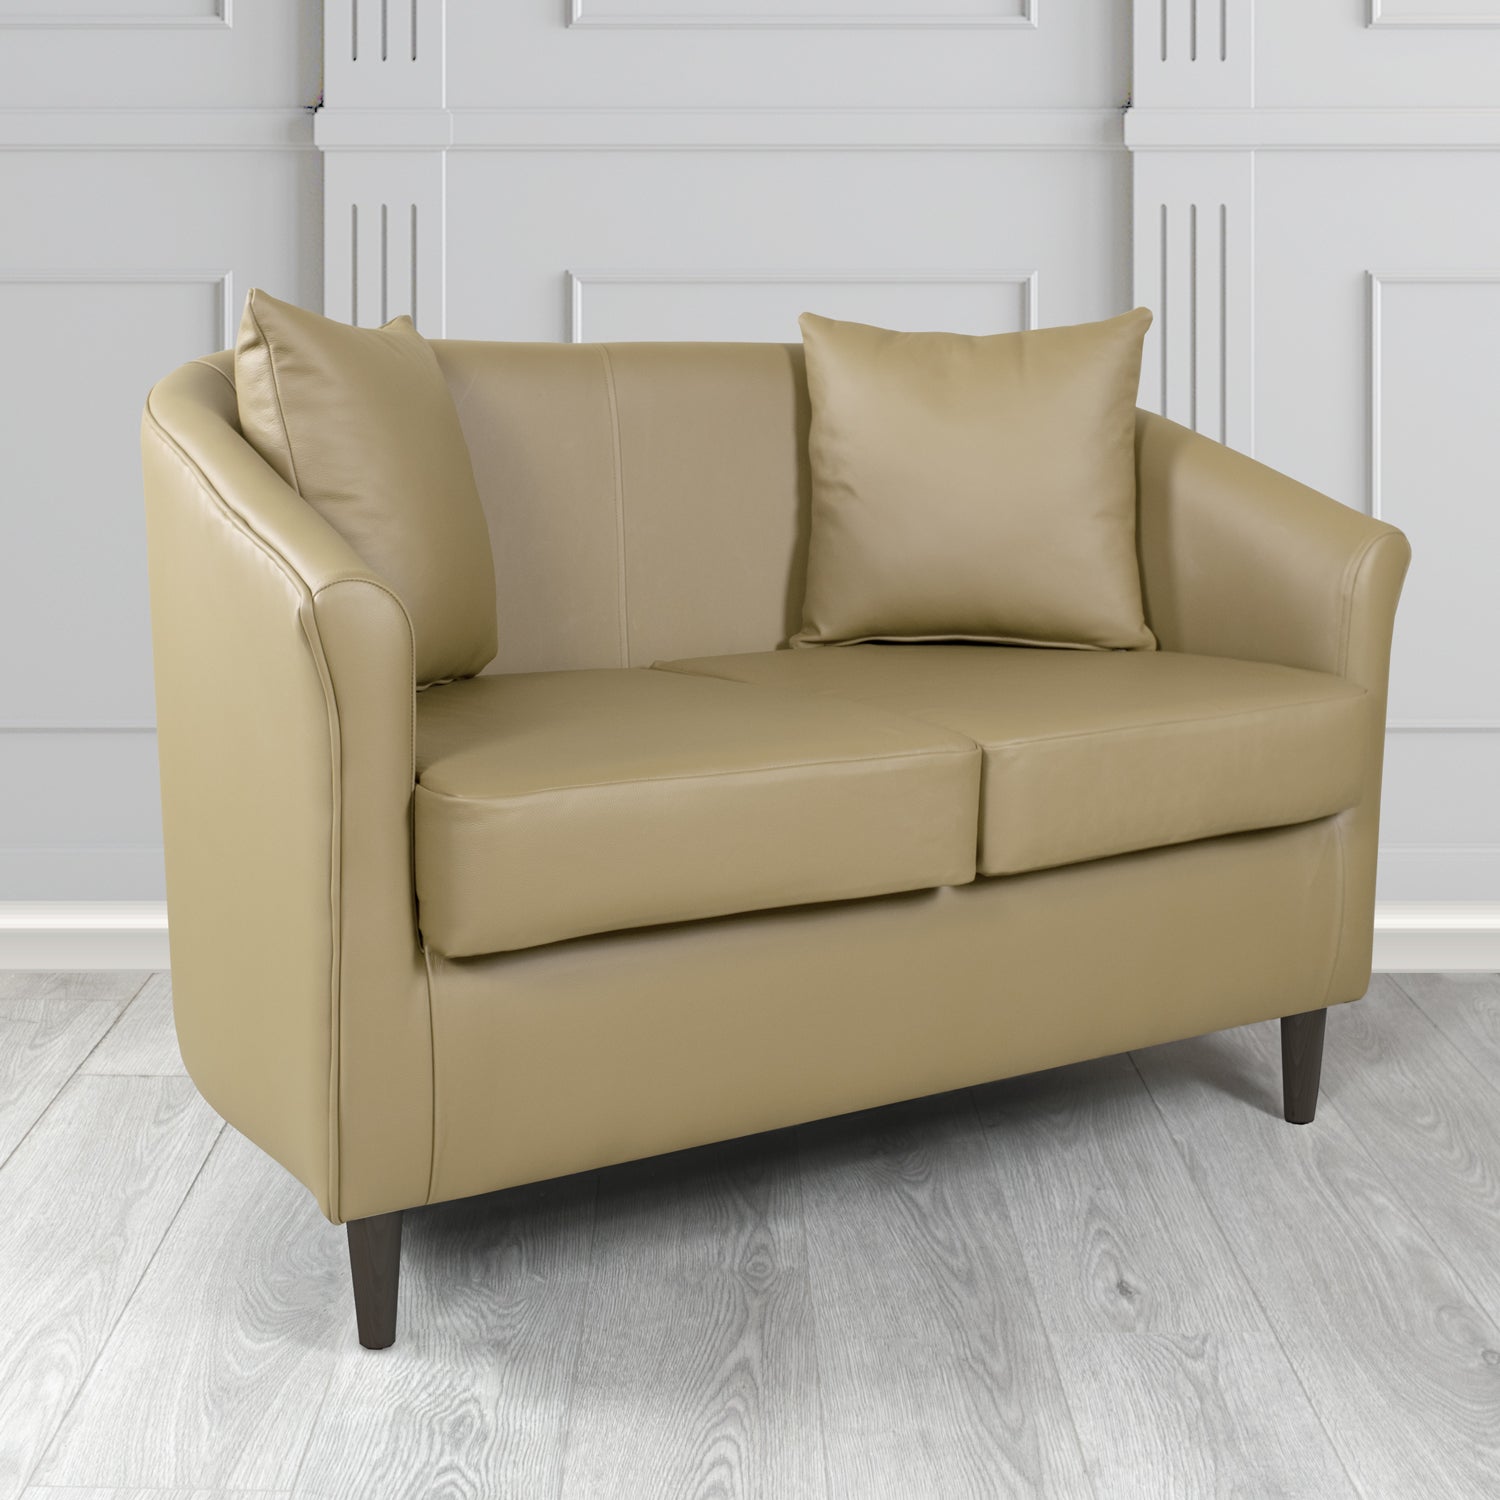 St Tropez Shelly Ash Crib 5 Genuine Leather 2 Seater Tub Sofa with Scatter Cushions - The Tub Chair Shop